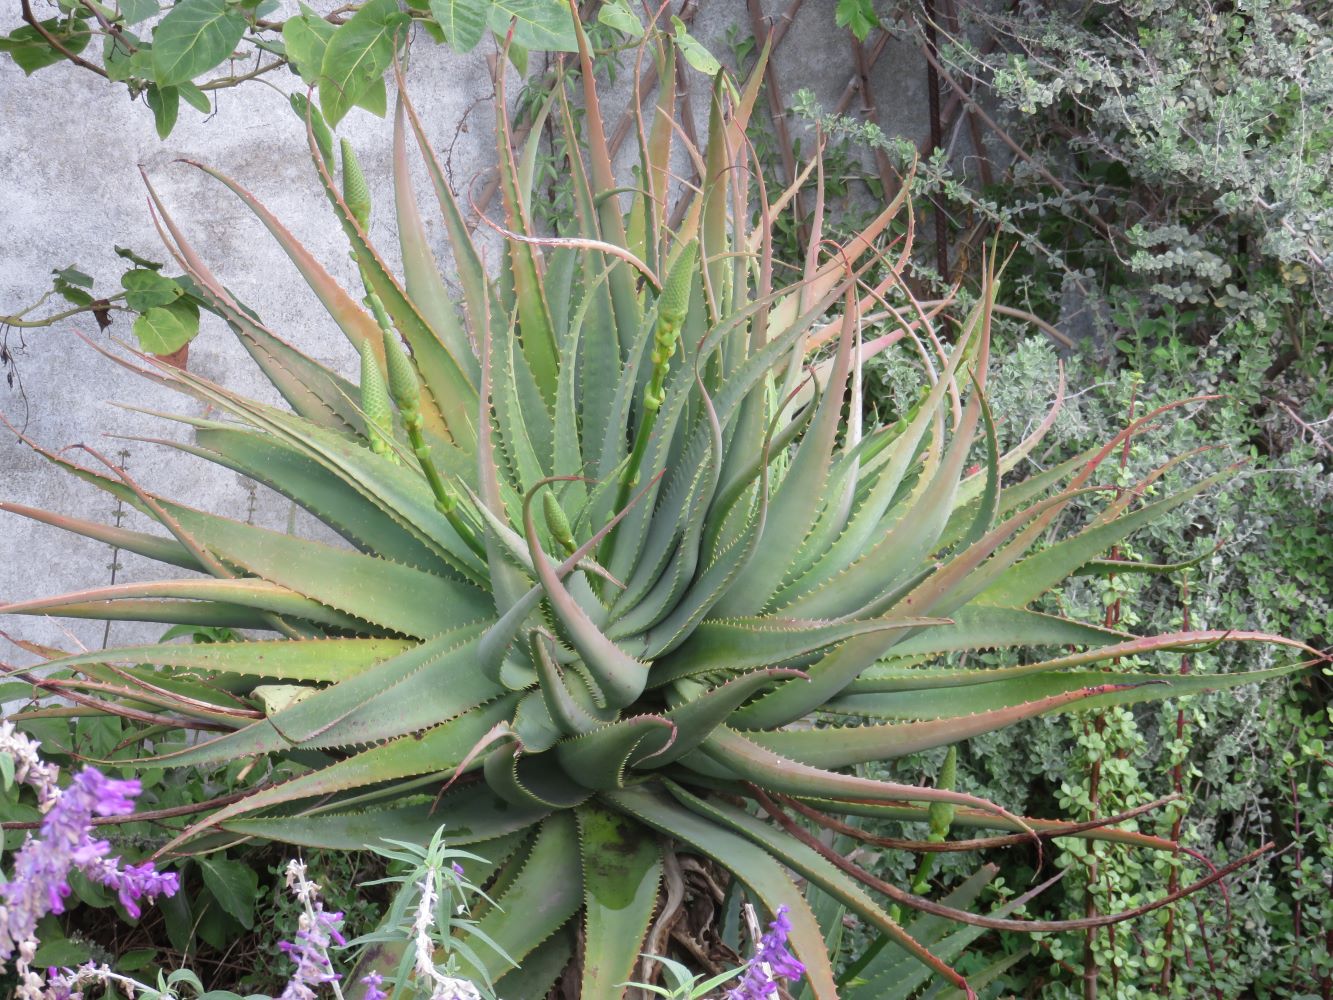 The aloe does well in a warm spot against a wall facing the prevailing sunshine.